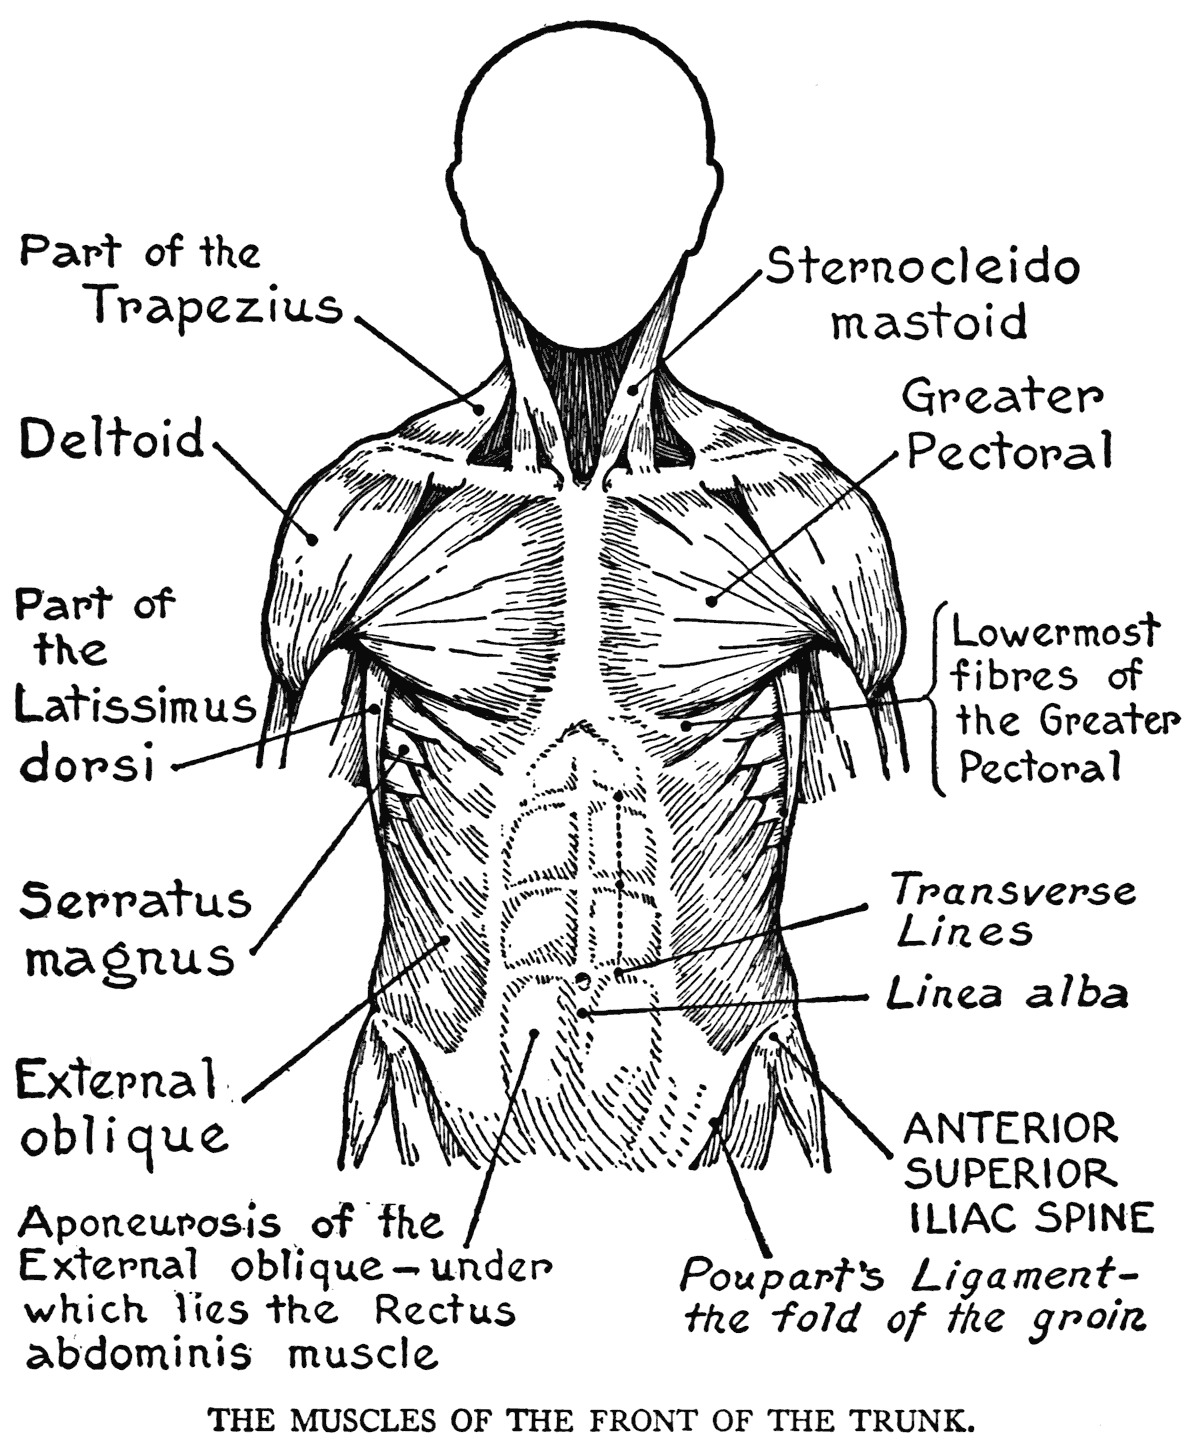 Body System Outline Coloring Pages - Coloring Pages For All Ages